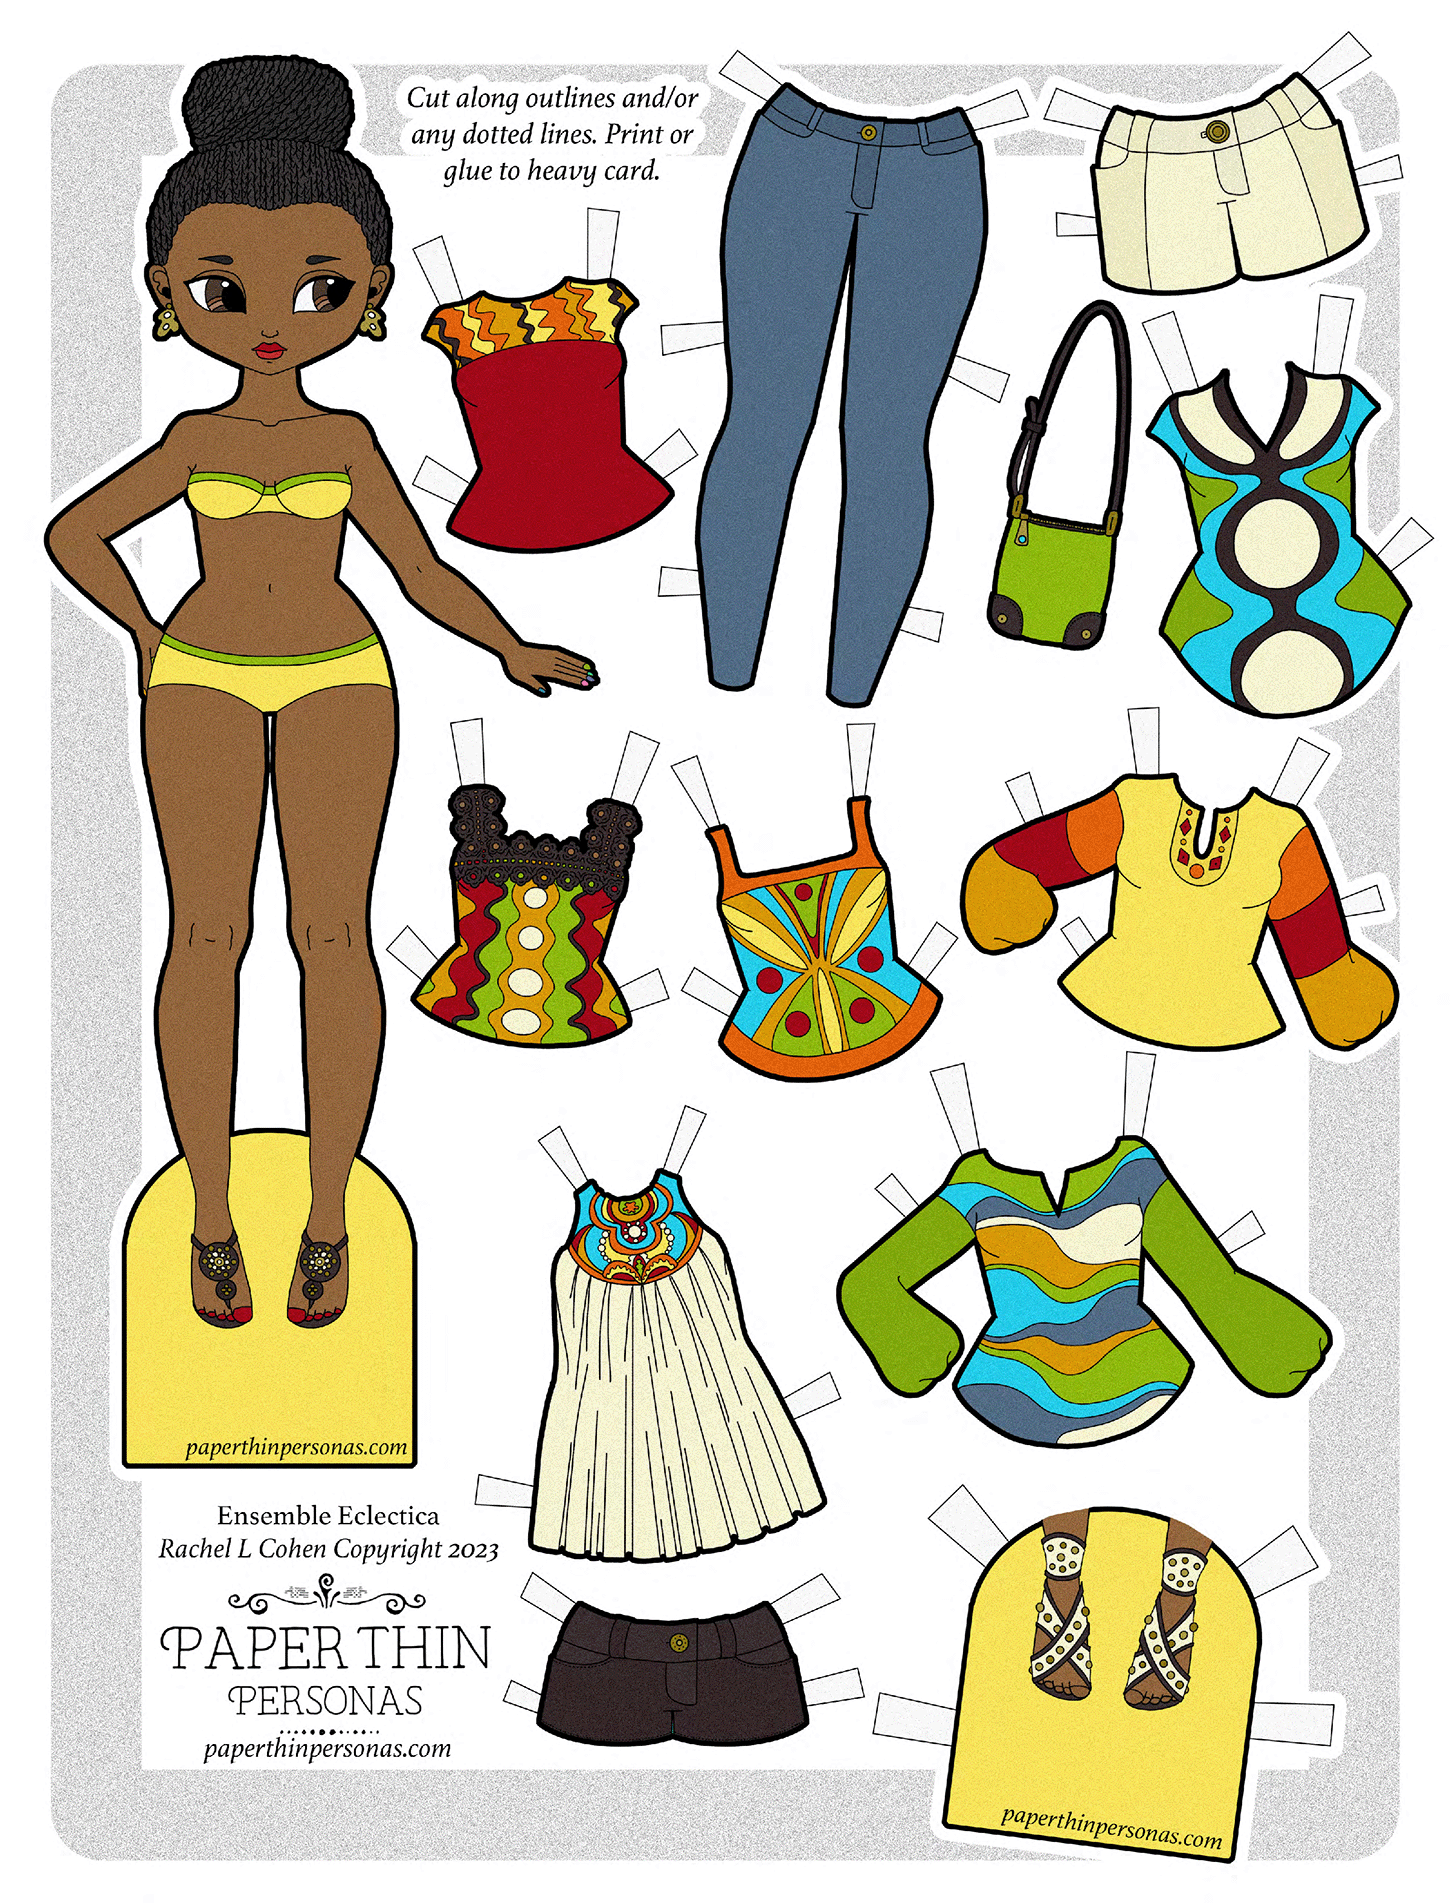 100 ULTIMATE Paper Dolls, Paper Dolls to Color, Paper Dolls Printable  Coloring, Paper Dolls PDF, Paper Dolls Prints, Paper Dolls Template 